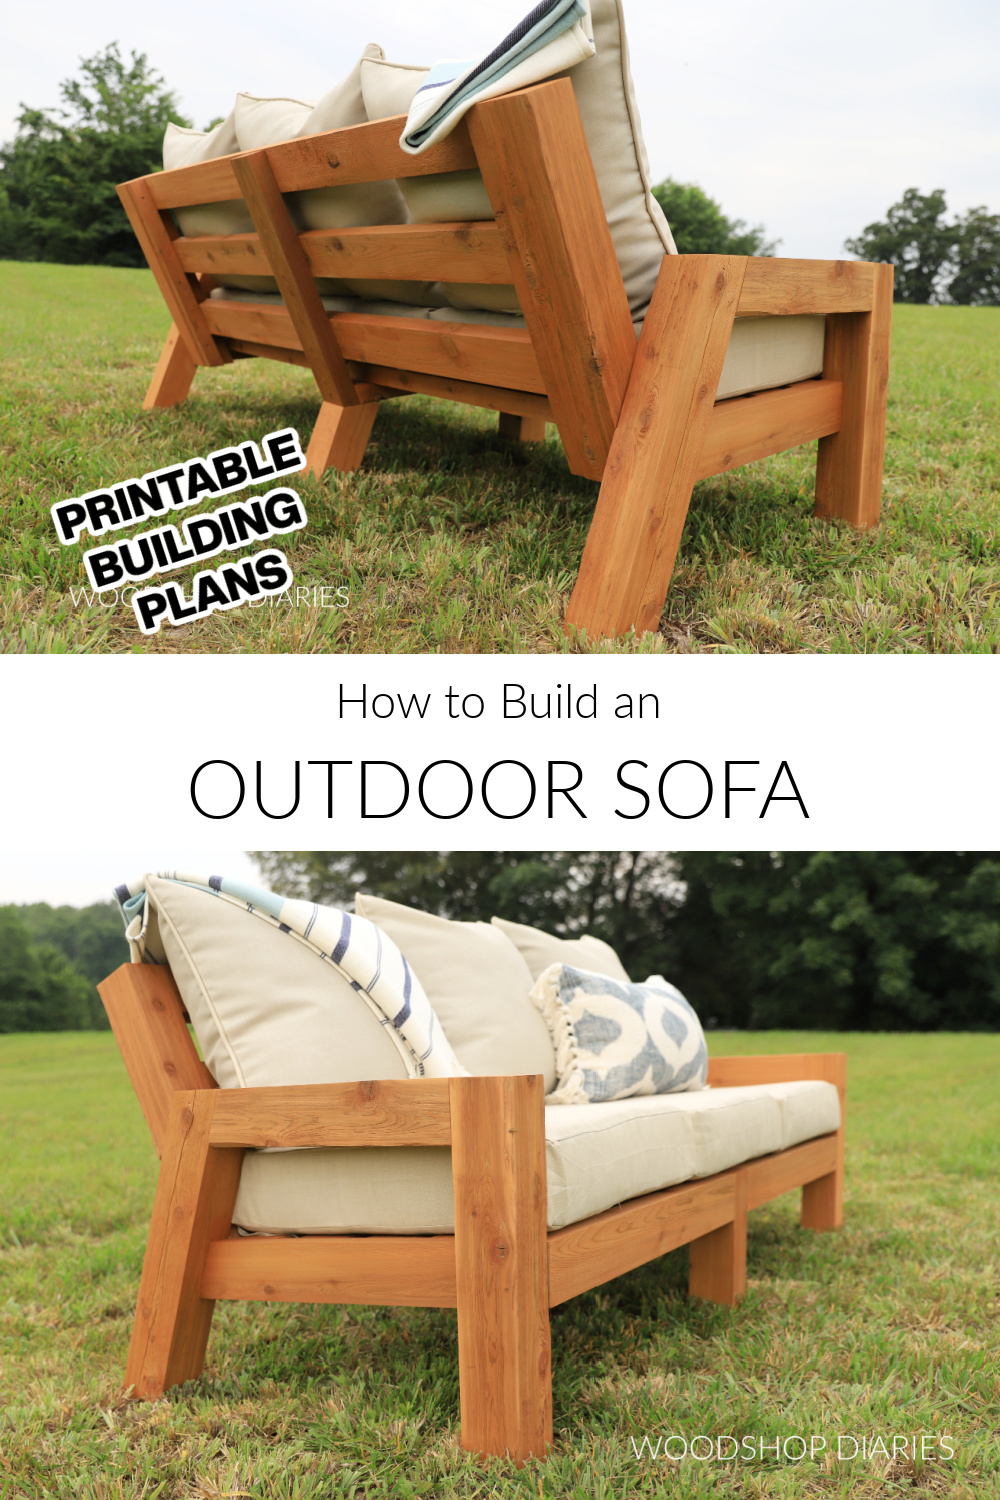 Pinterest collage image showing back side of outdoor sofa at top and front side of outdoor sofa at bottom with text "how to build an outdoor sofa printable building plans"